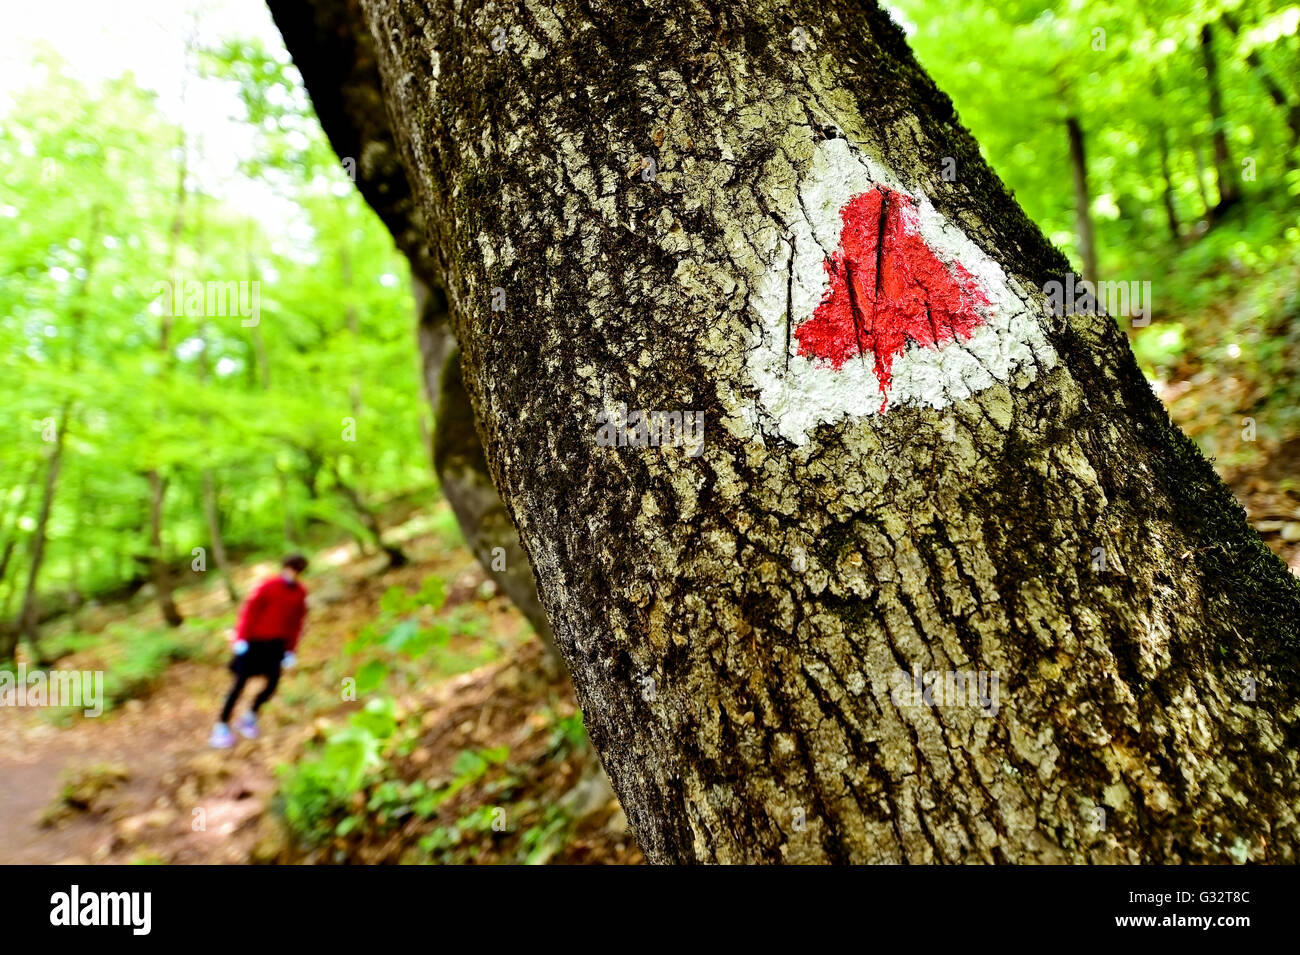 Hiking red triangle paint marking on a tree with hiker on the trail Stock Photo